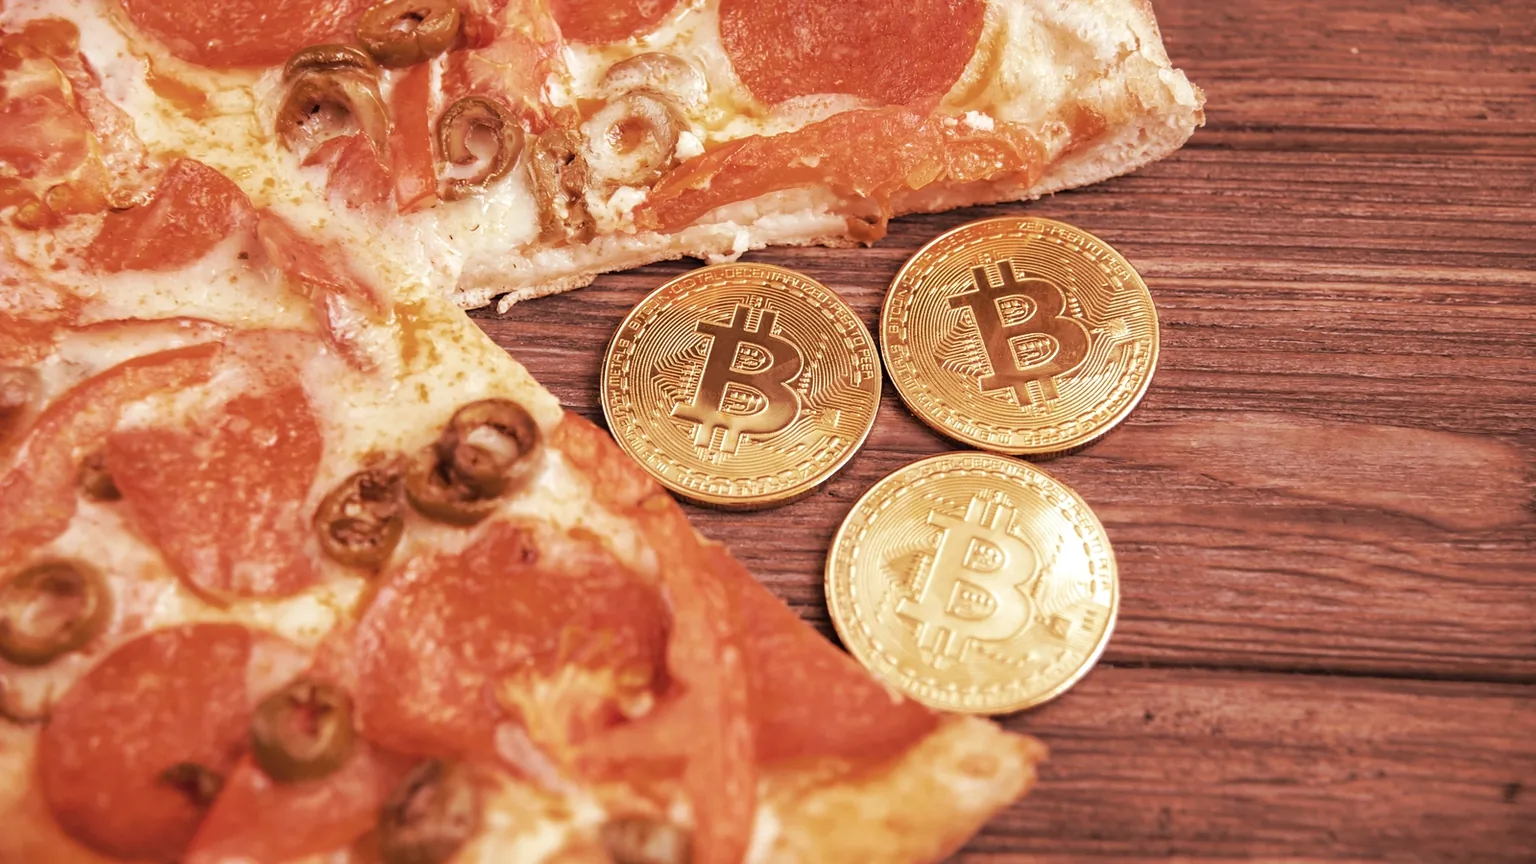 Bitcoin and pizza. Image: Shutterstock